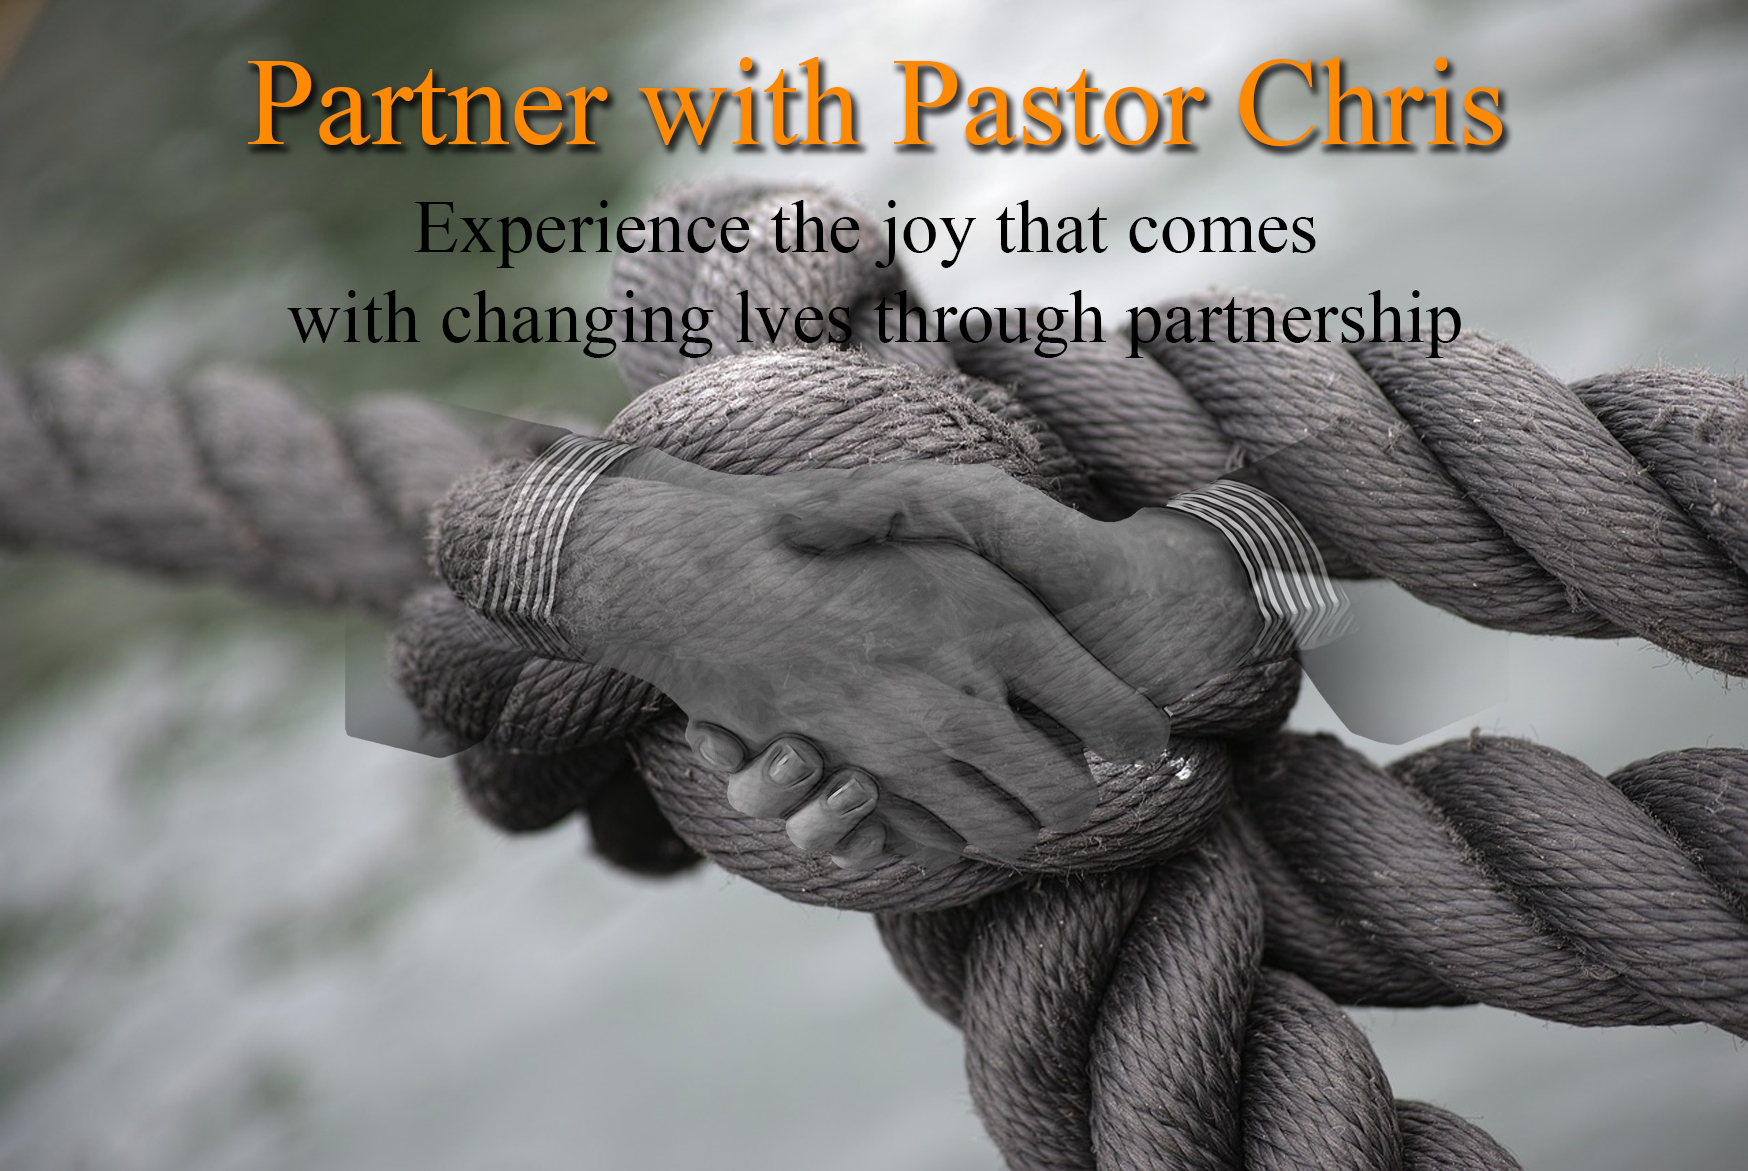 PARTNER WITH PASTOR CHRIS